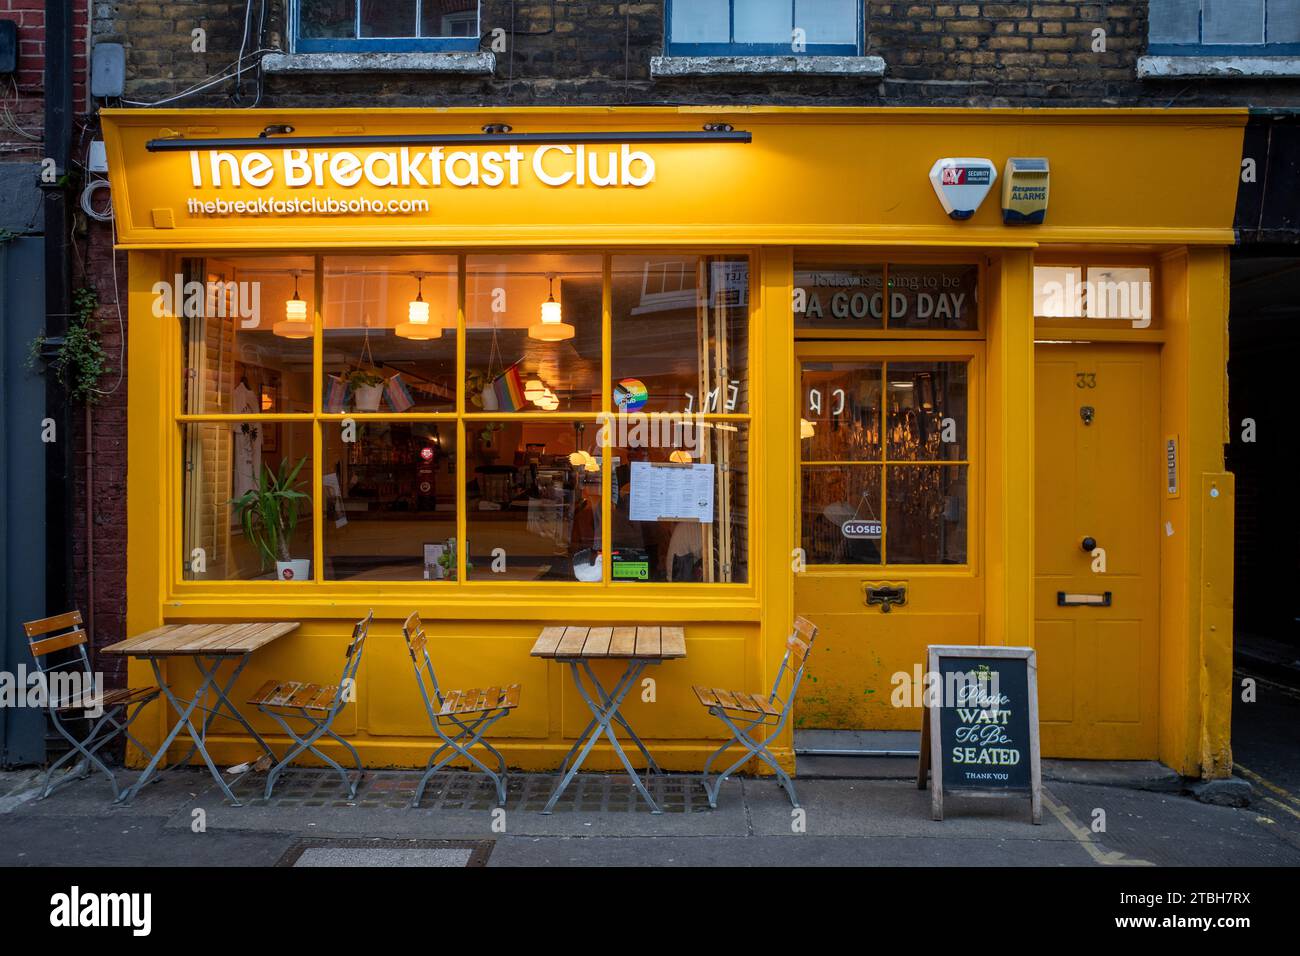 The Breakfast Club Soho London - the Breakfast Club restaurant 33 D'Arblay St, Soho, London. The Breakfast Club was founded in 2005 at this location. Stock Photo